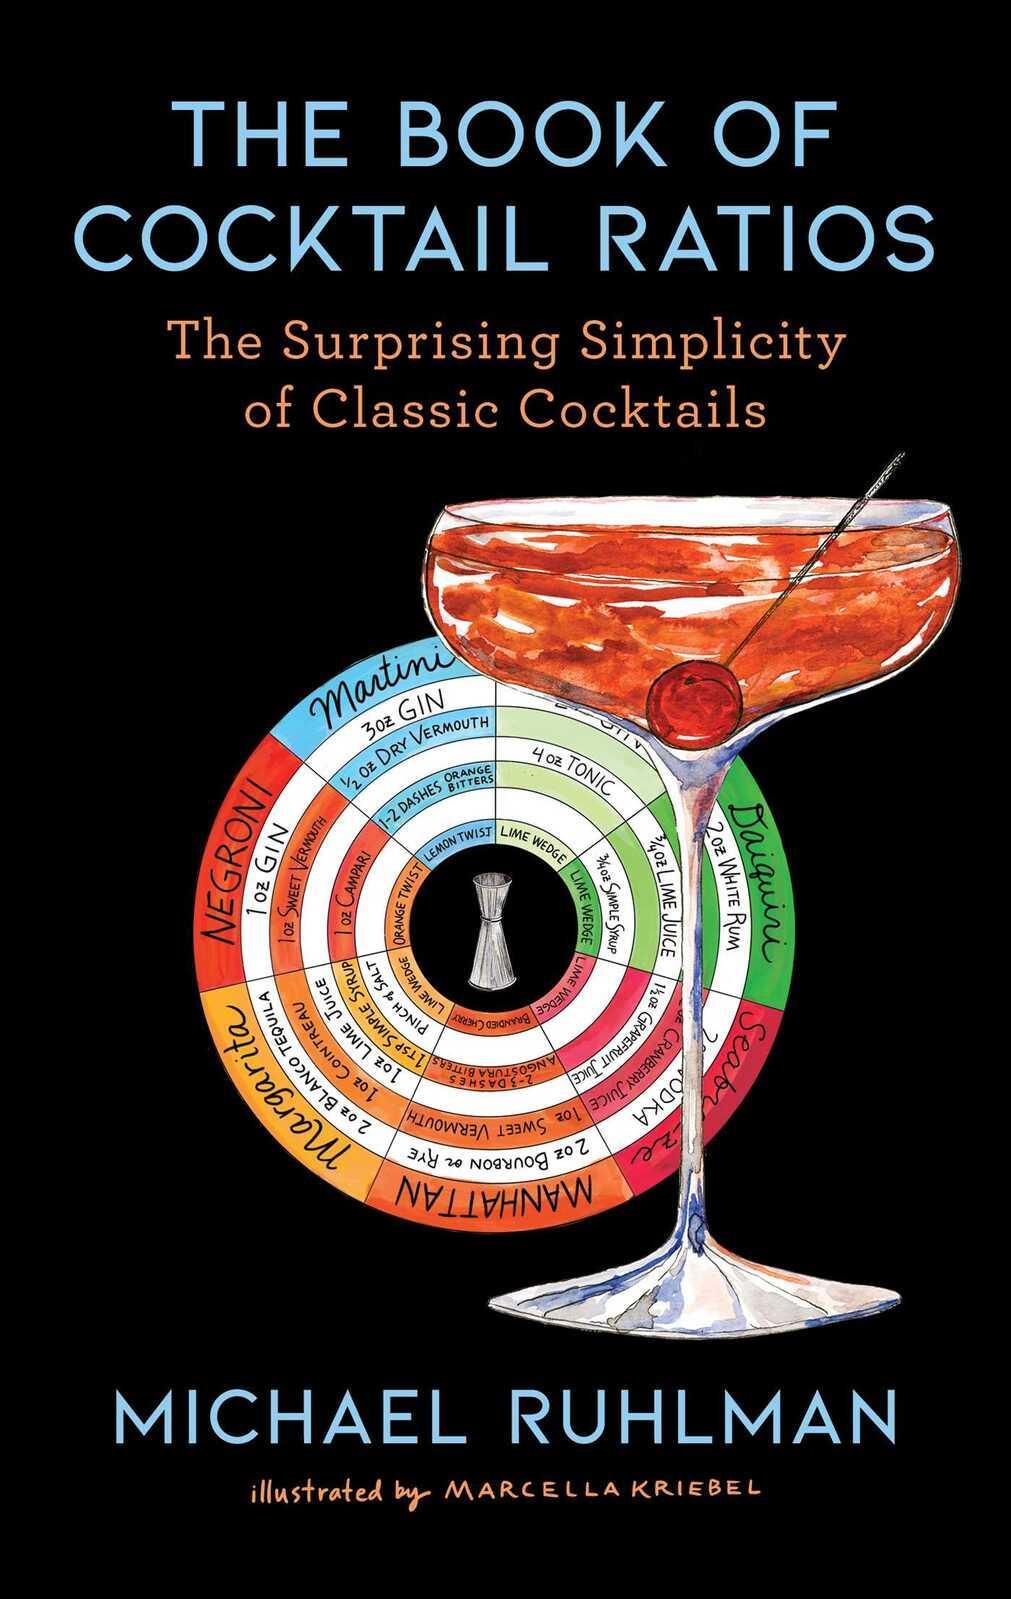 Book of Cocktail Ratios, The: The Surprising Simplicity of Classic Cocktails